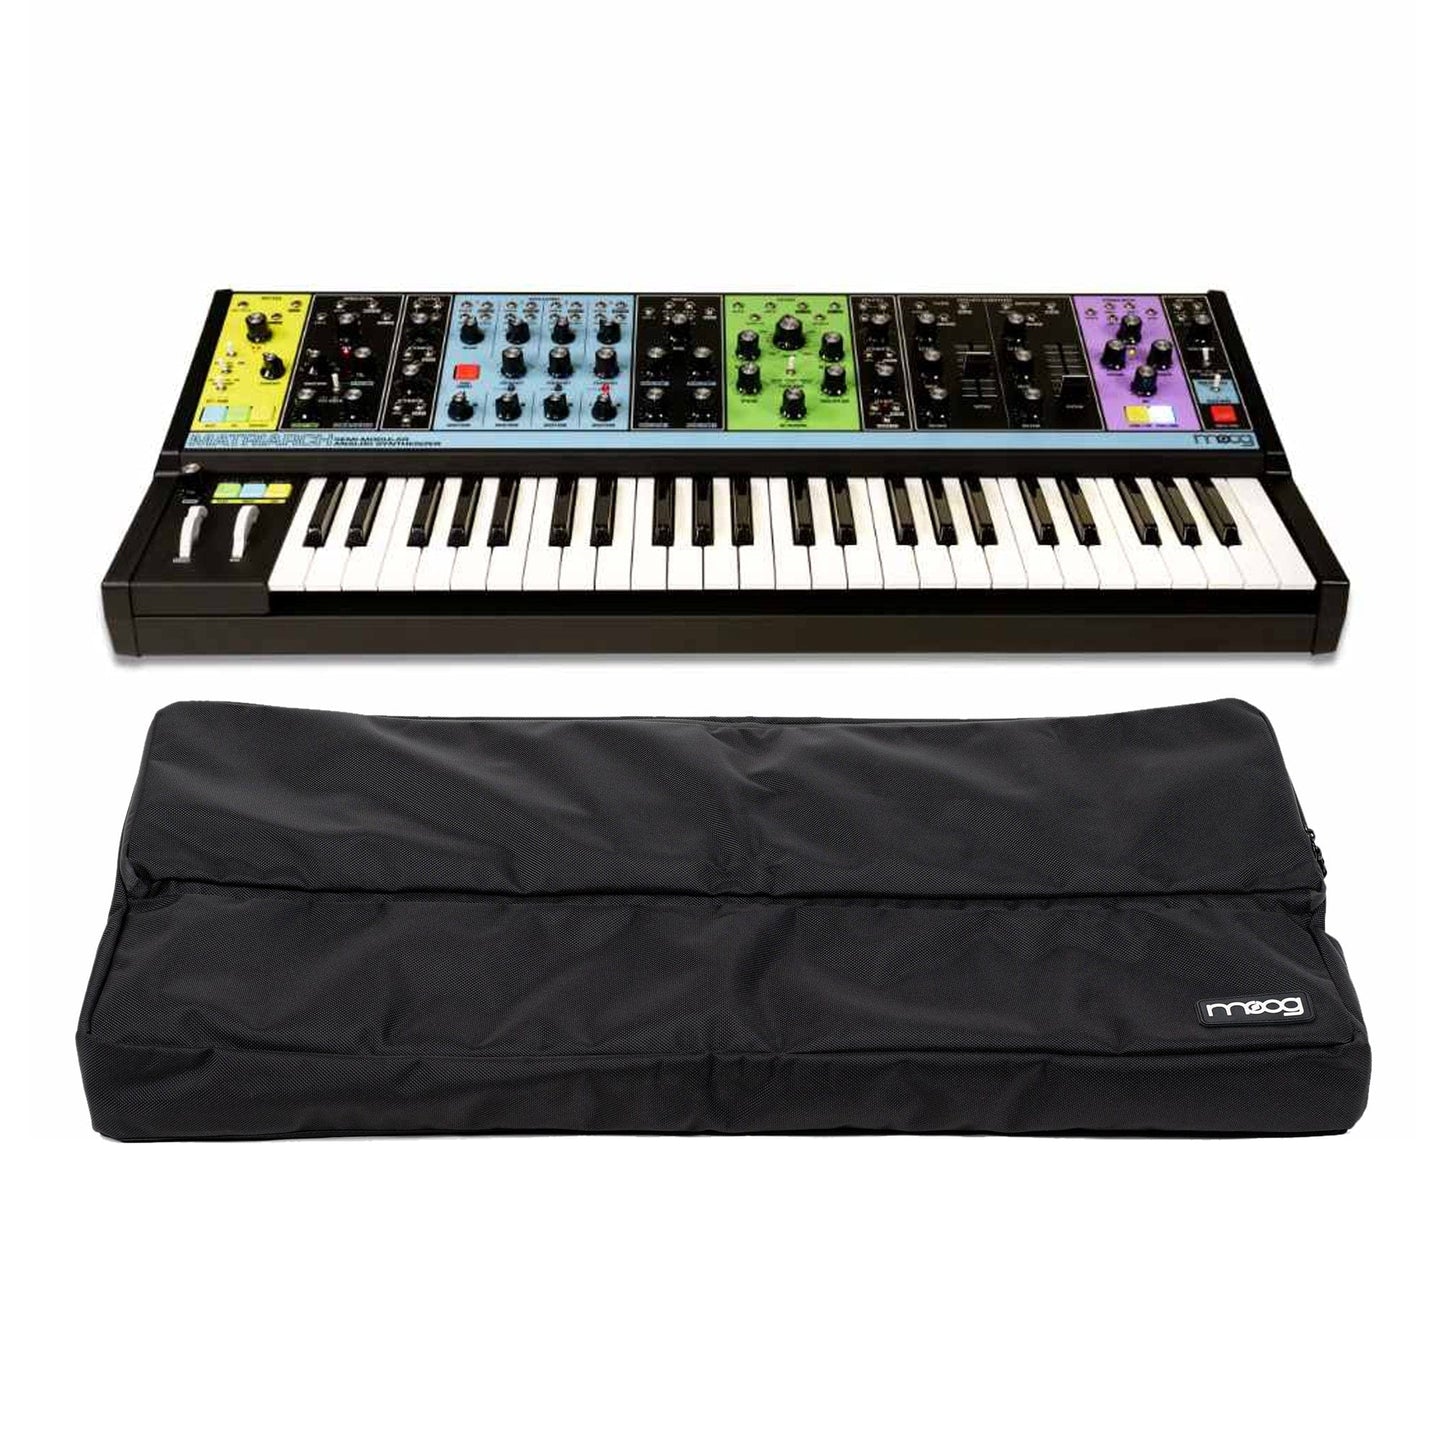 Moog Matriarch Analog Synthesizer w/Built-In Sequencer, Arpeggiator, Stereo Ladder Filters, and Stereo Analog Delay Dust Cover for Matriarch Synth Bundle Keyboards and Synths / Synths / Analog Synths